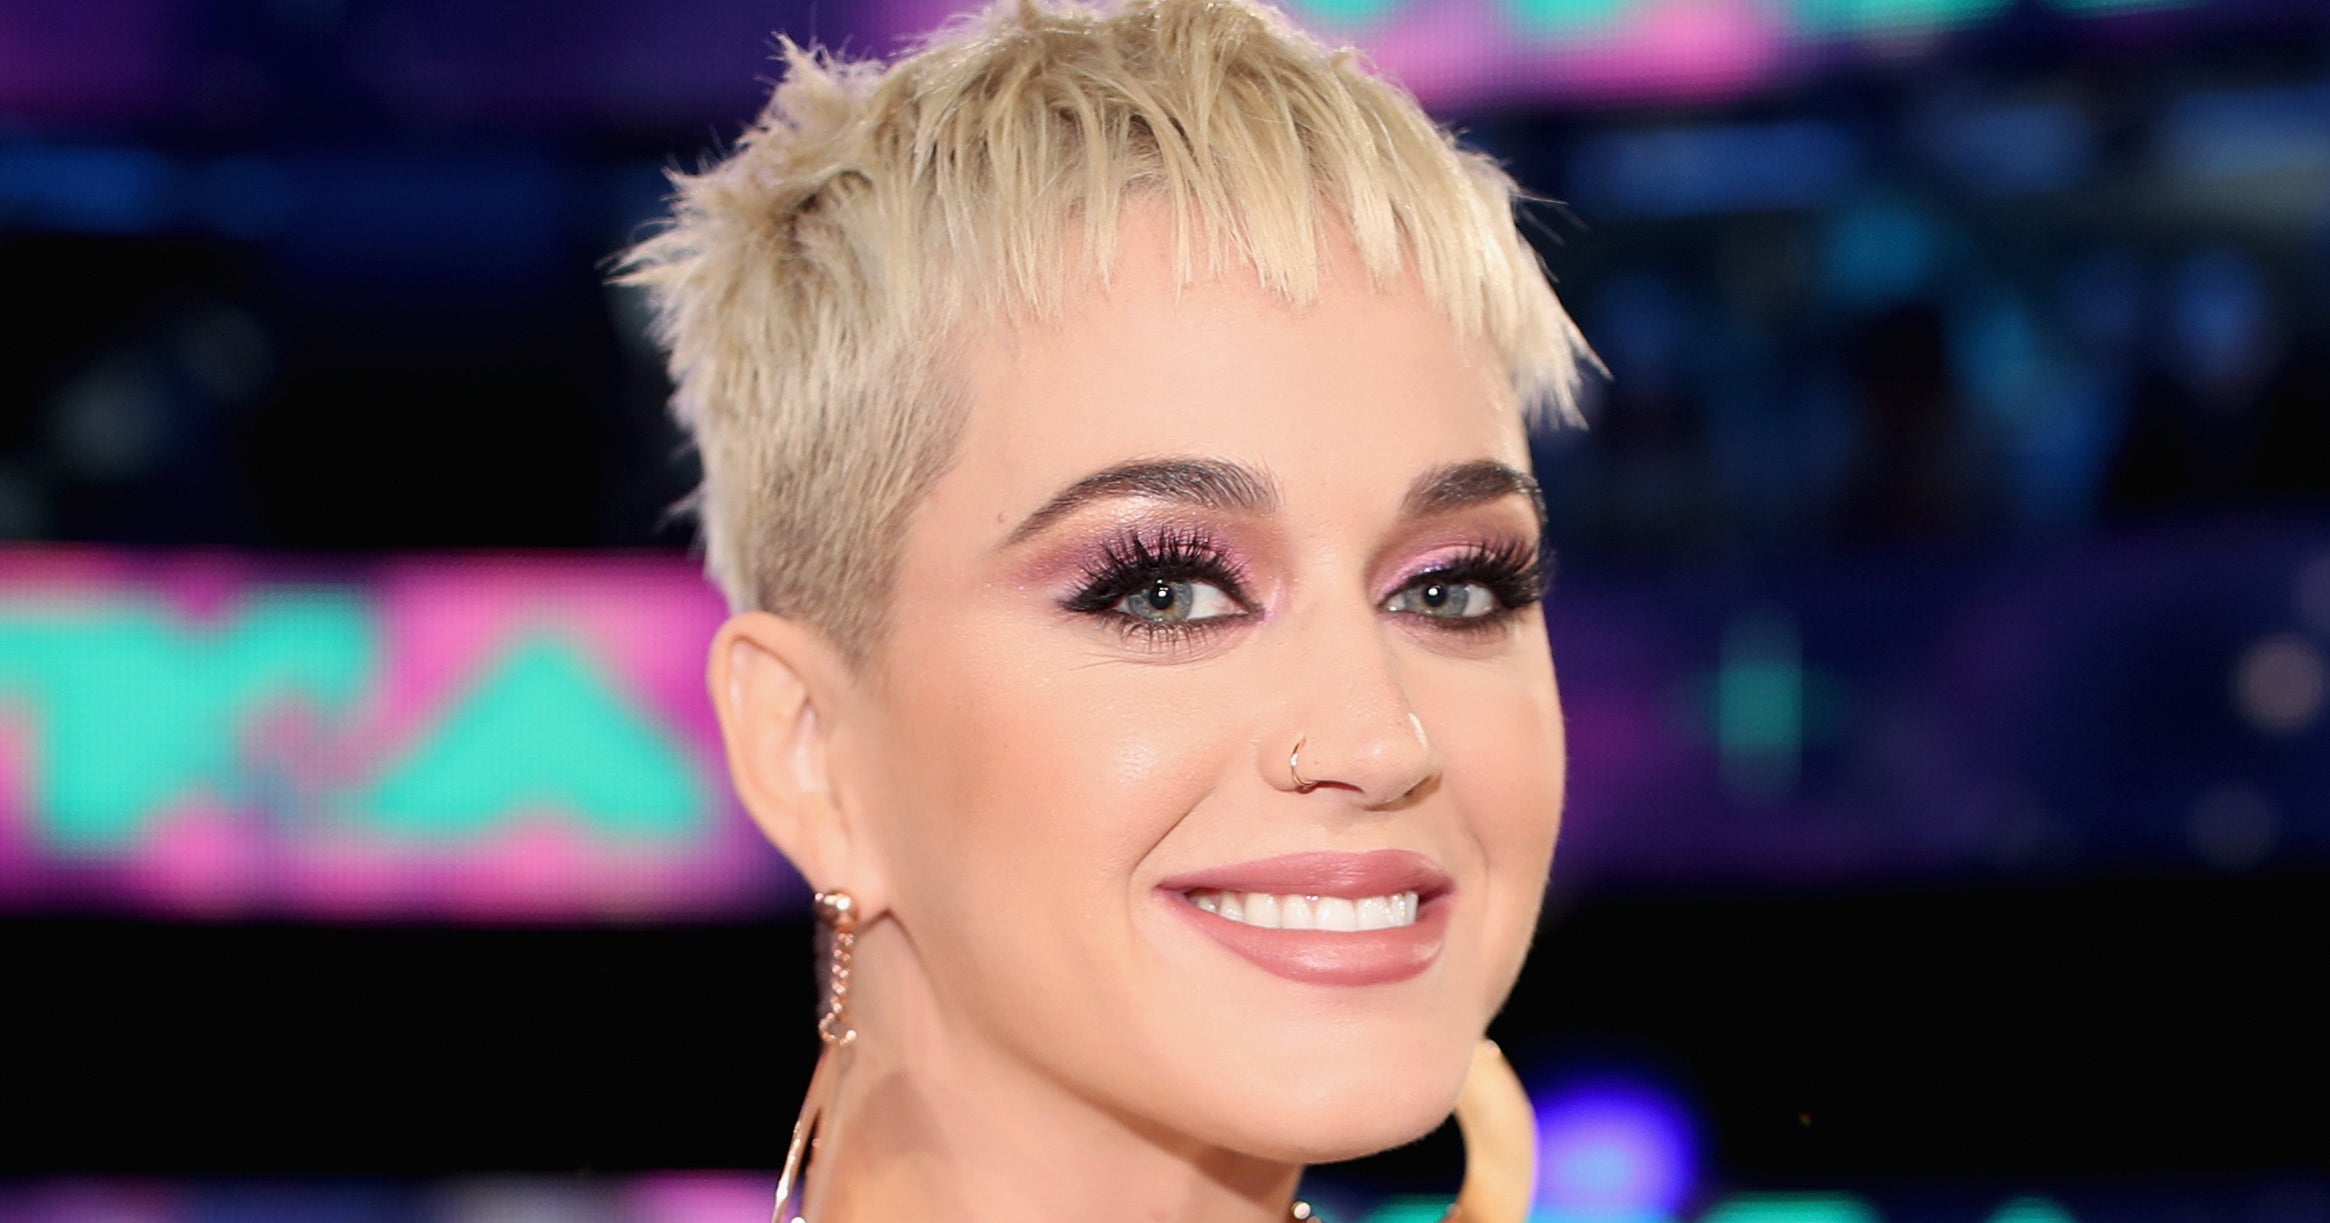 Katy Perry Dyed Hair Dark Brown With Long Extensions